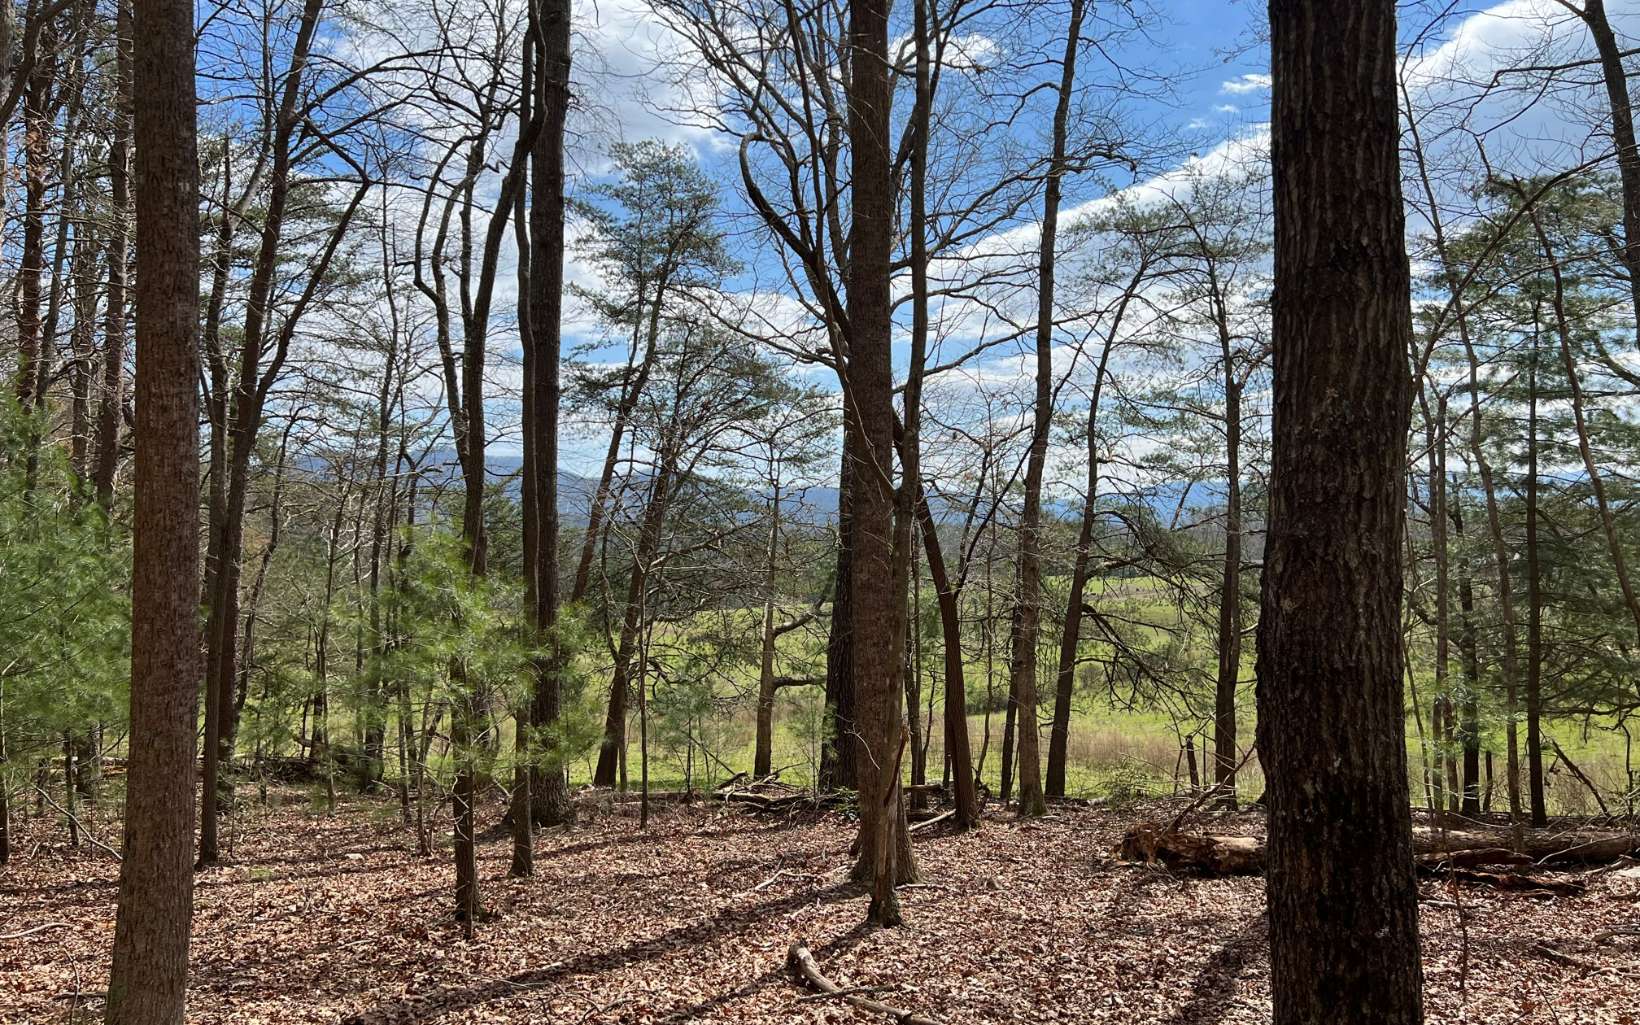 Looking to get away from it all and escape to the north Georgia mountains? Build your dream home, or a vacation home, on this beautiful 17 acre piece of land off Hwy 60 with mostly a gentle, rolling topography that will allow for long-range mountain views with the removal of some trees. The property has a mixture of vegetation with mostly hardwoods & there's a stream towards the rear. Just a few miles away is Morganton Point - a recreation area along the shores of Lake Blue Ridge with a boat launch, beach access, picnic tables and camping sites. So many natural amenities surround you offering hiking and biking trails, fishing, kayaking, canoeing, etc. And don't worry, you still have access to shopping and amazing restaurants just a short drive away in downtown Blue Ridge. This is a rare piece of property with so many possibilities!